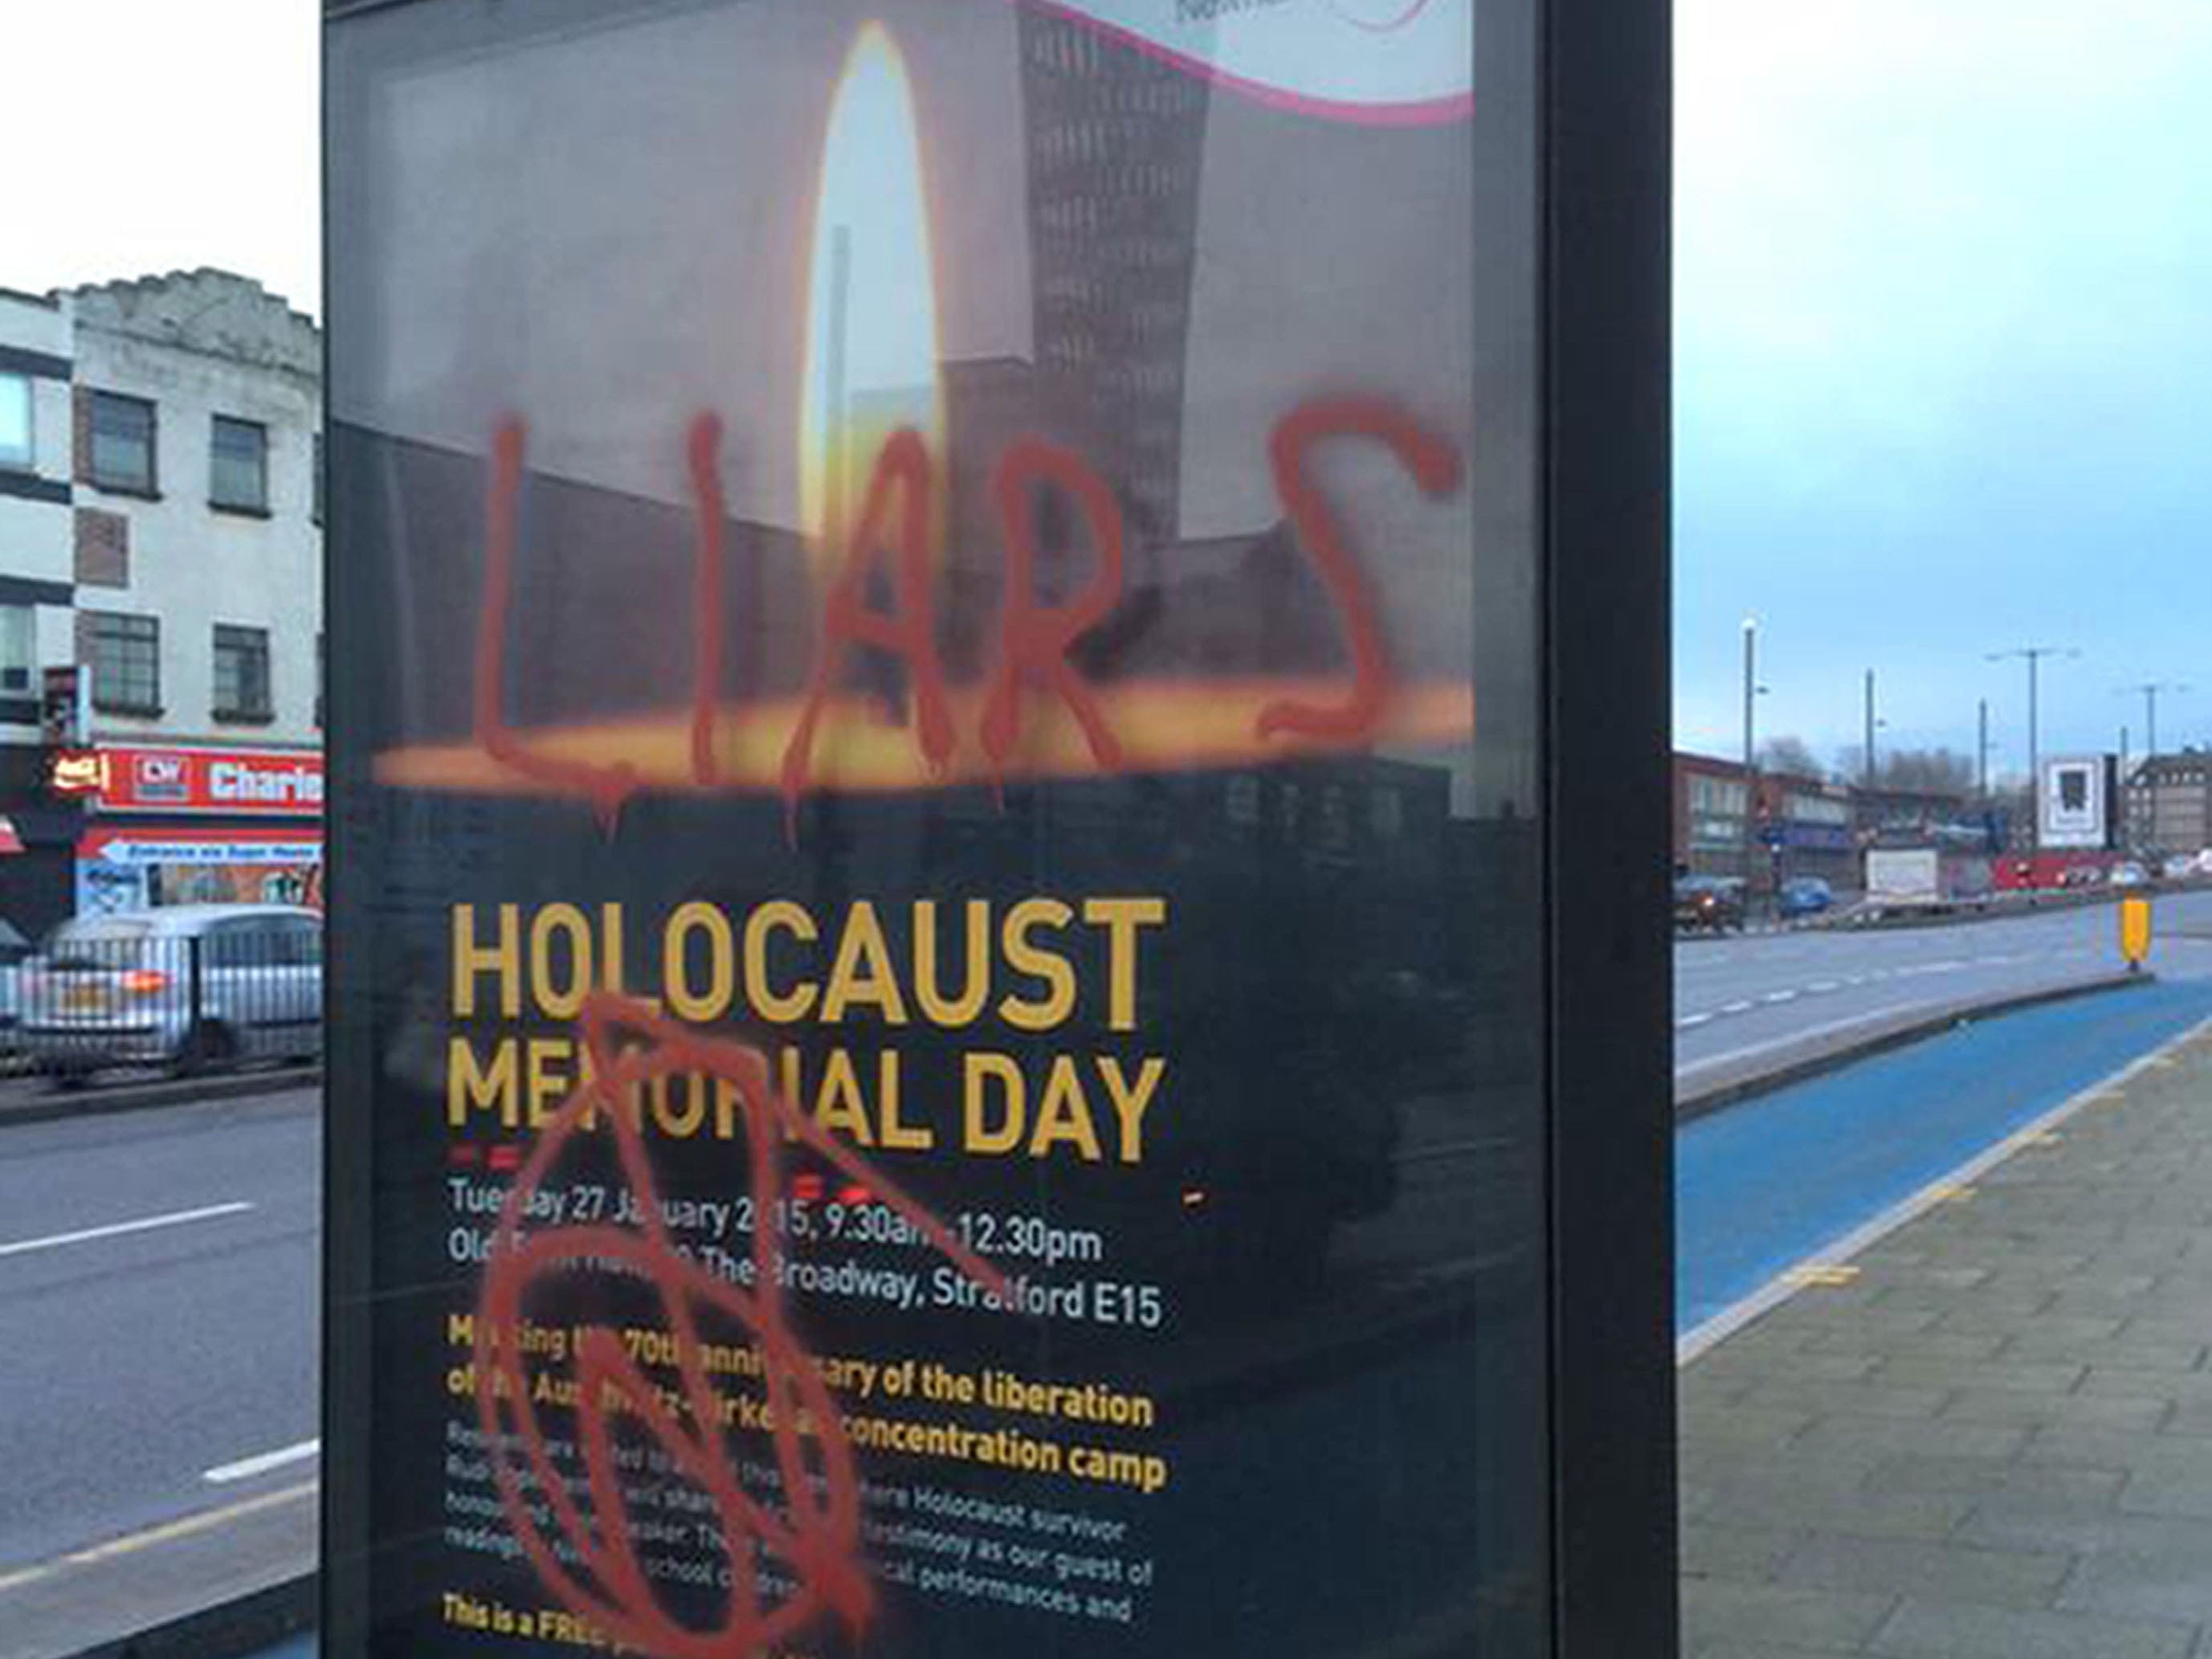 Graffiti on posters advertising Newham Council's Holocaust Memorial Day event in Stratford, London